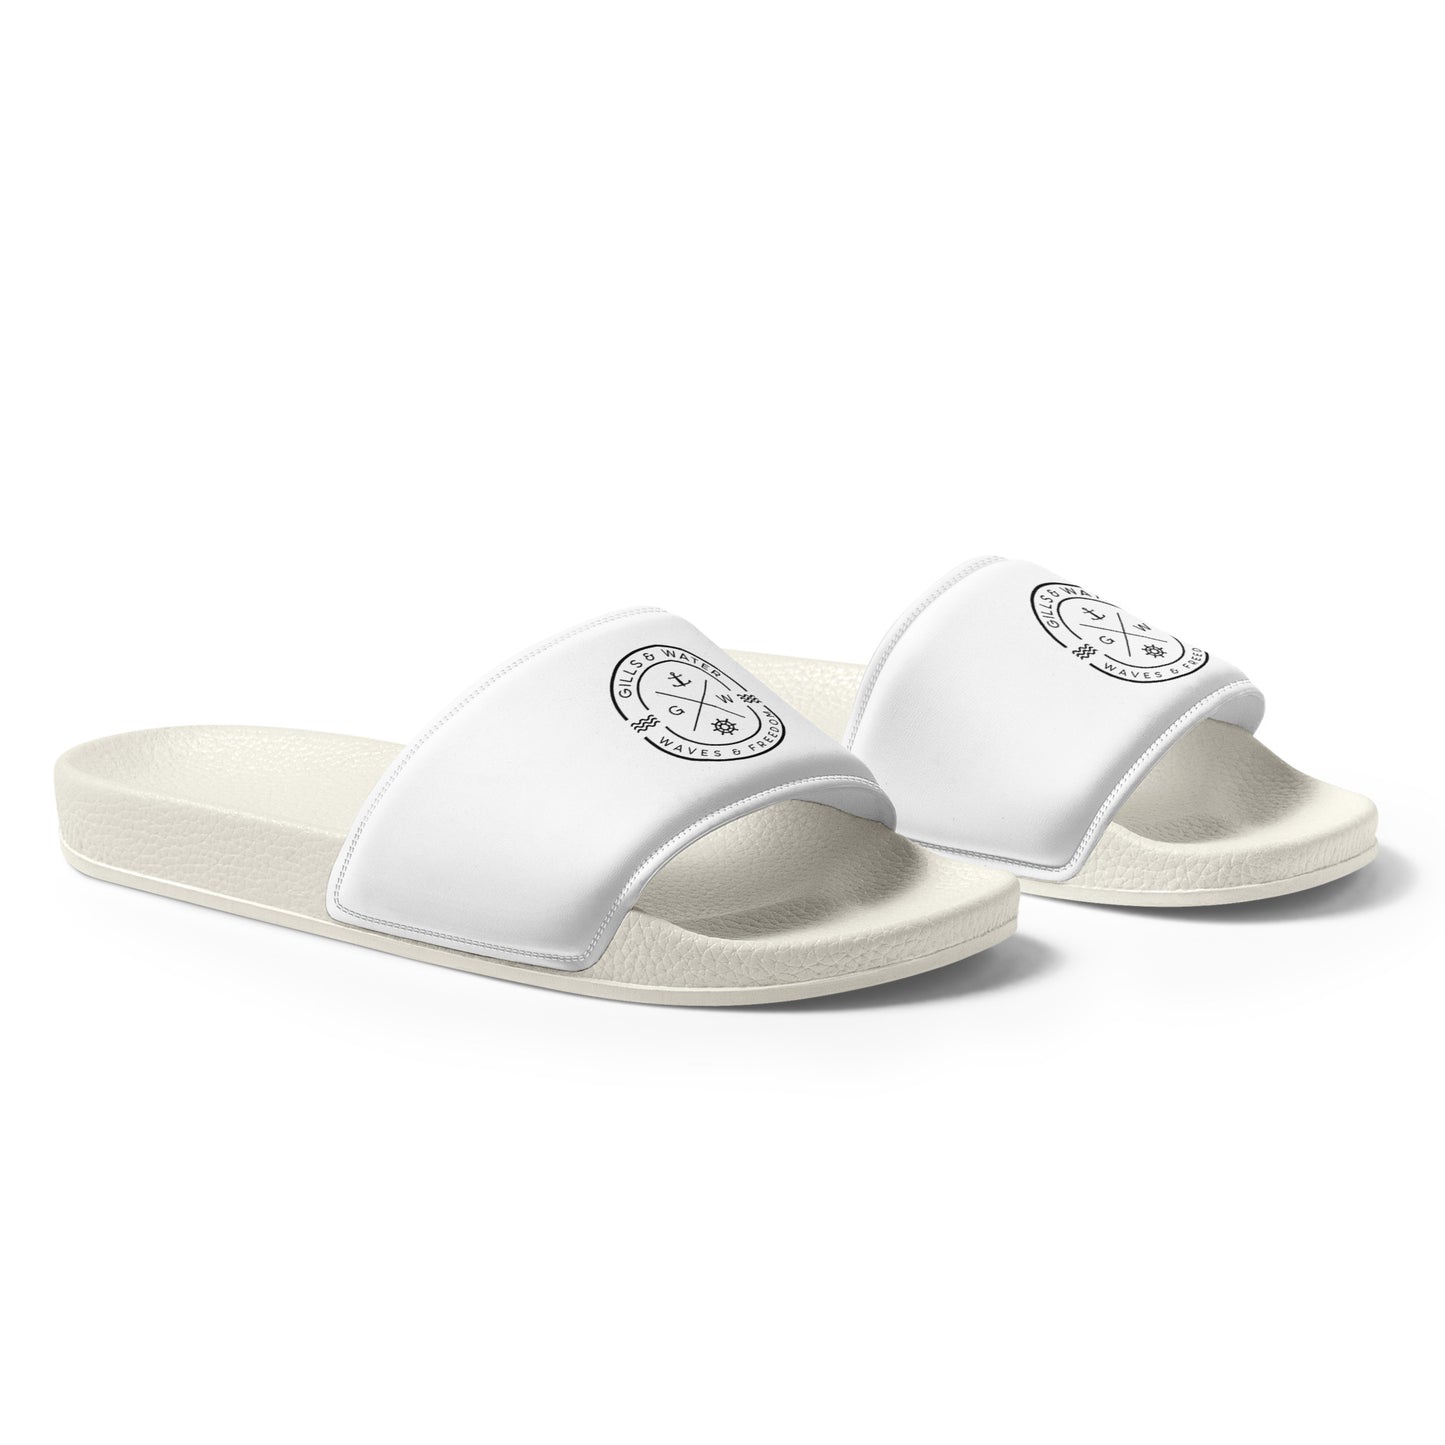 WaveGlide: Women's Slides by Gills and Water